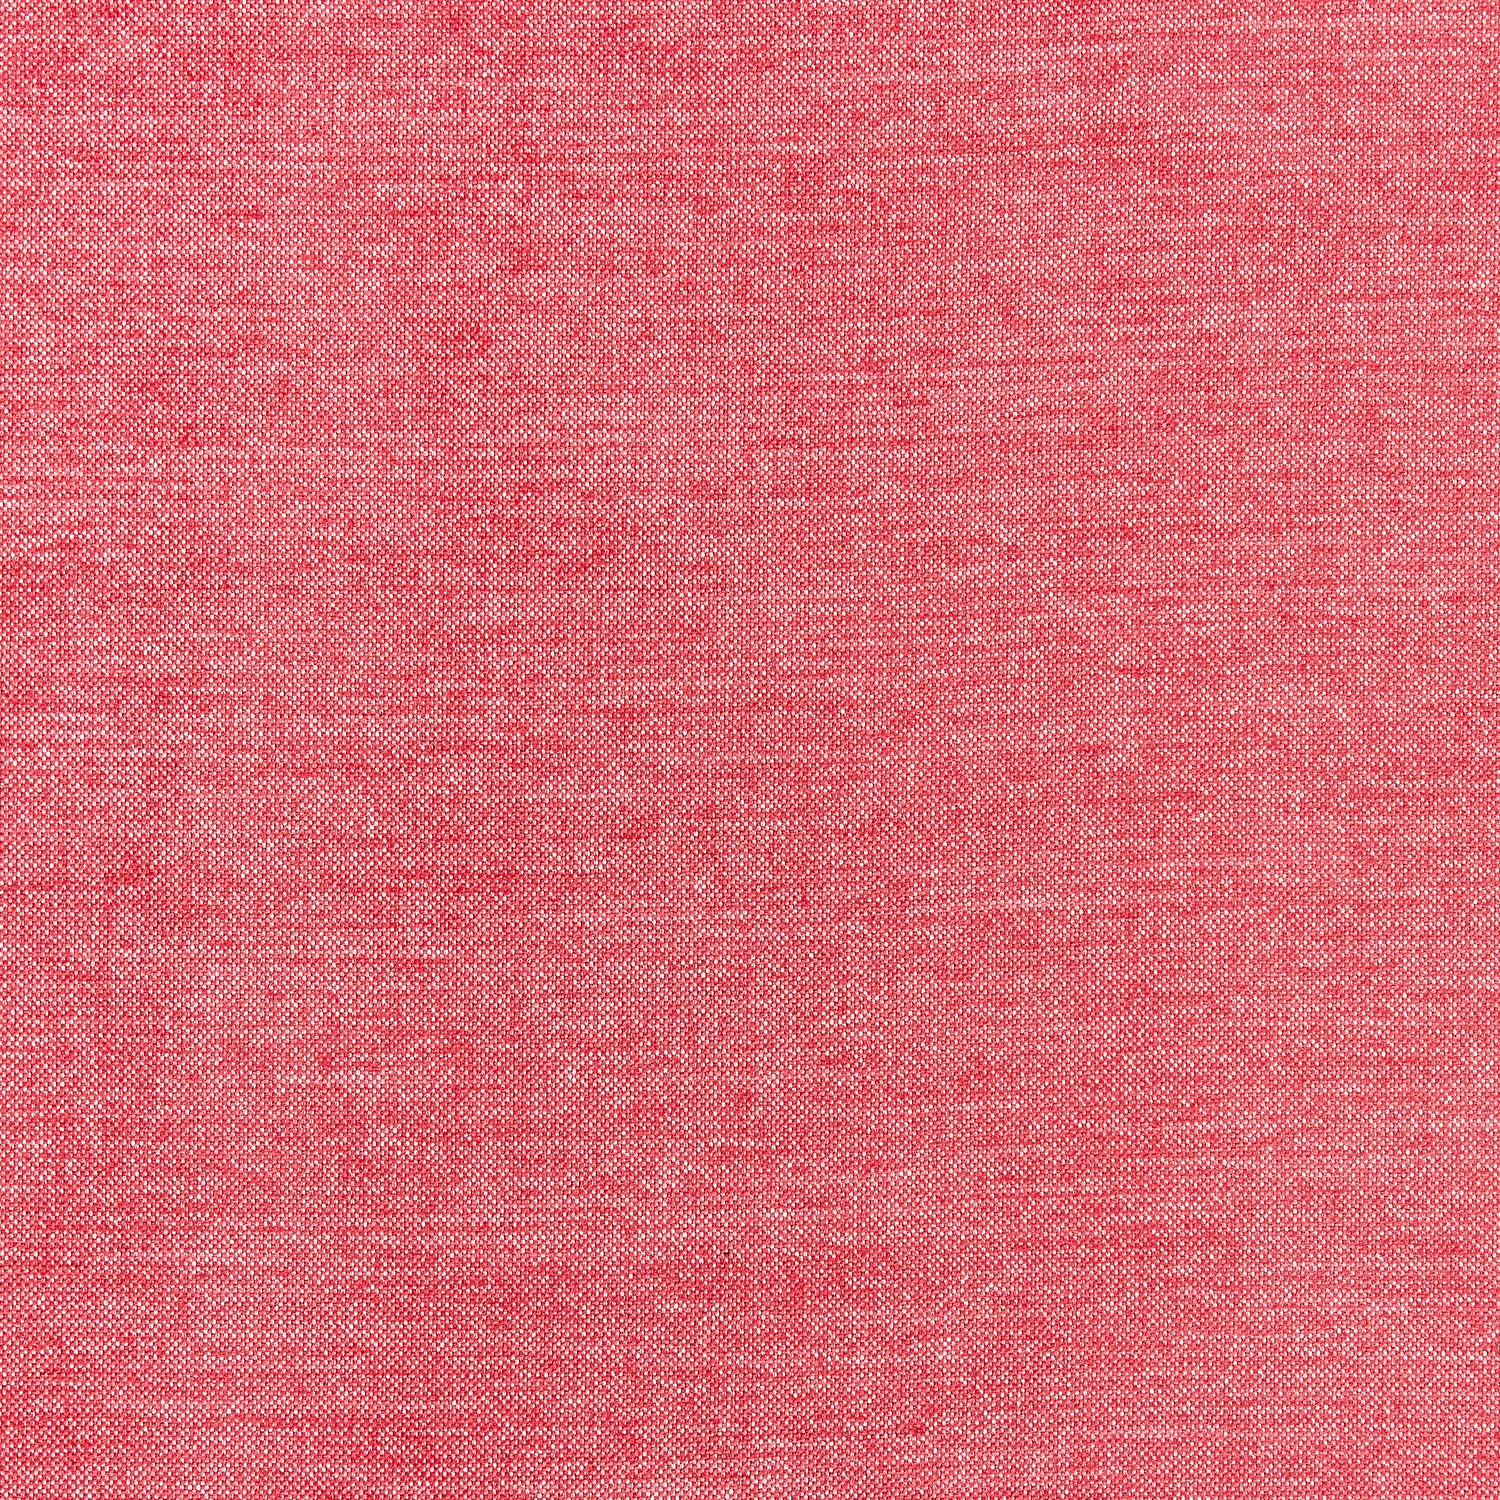 Aura fabric in peony color - pattern number W80275 - by Thibaut in the Kaleidoscope Fabrics collection